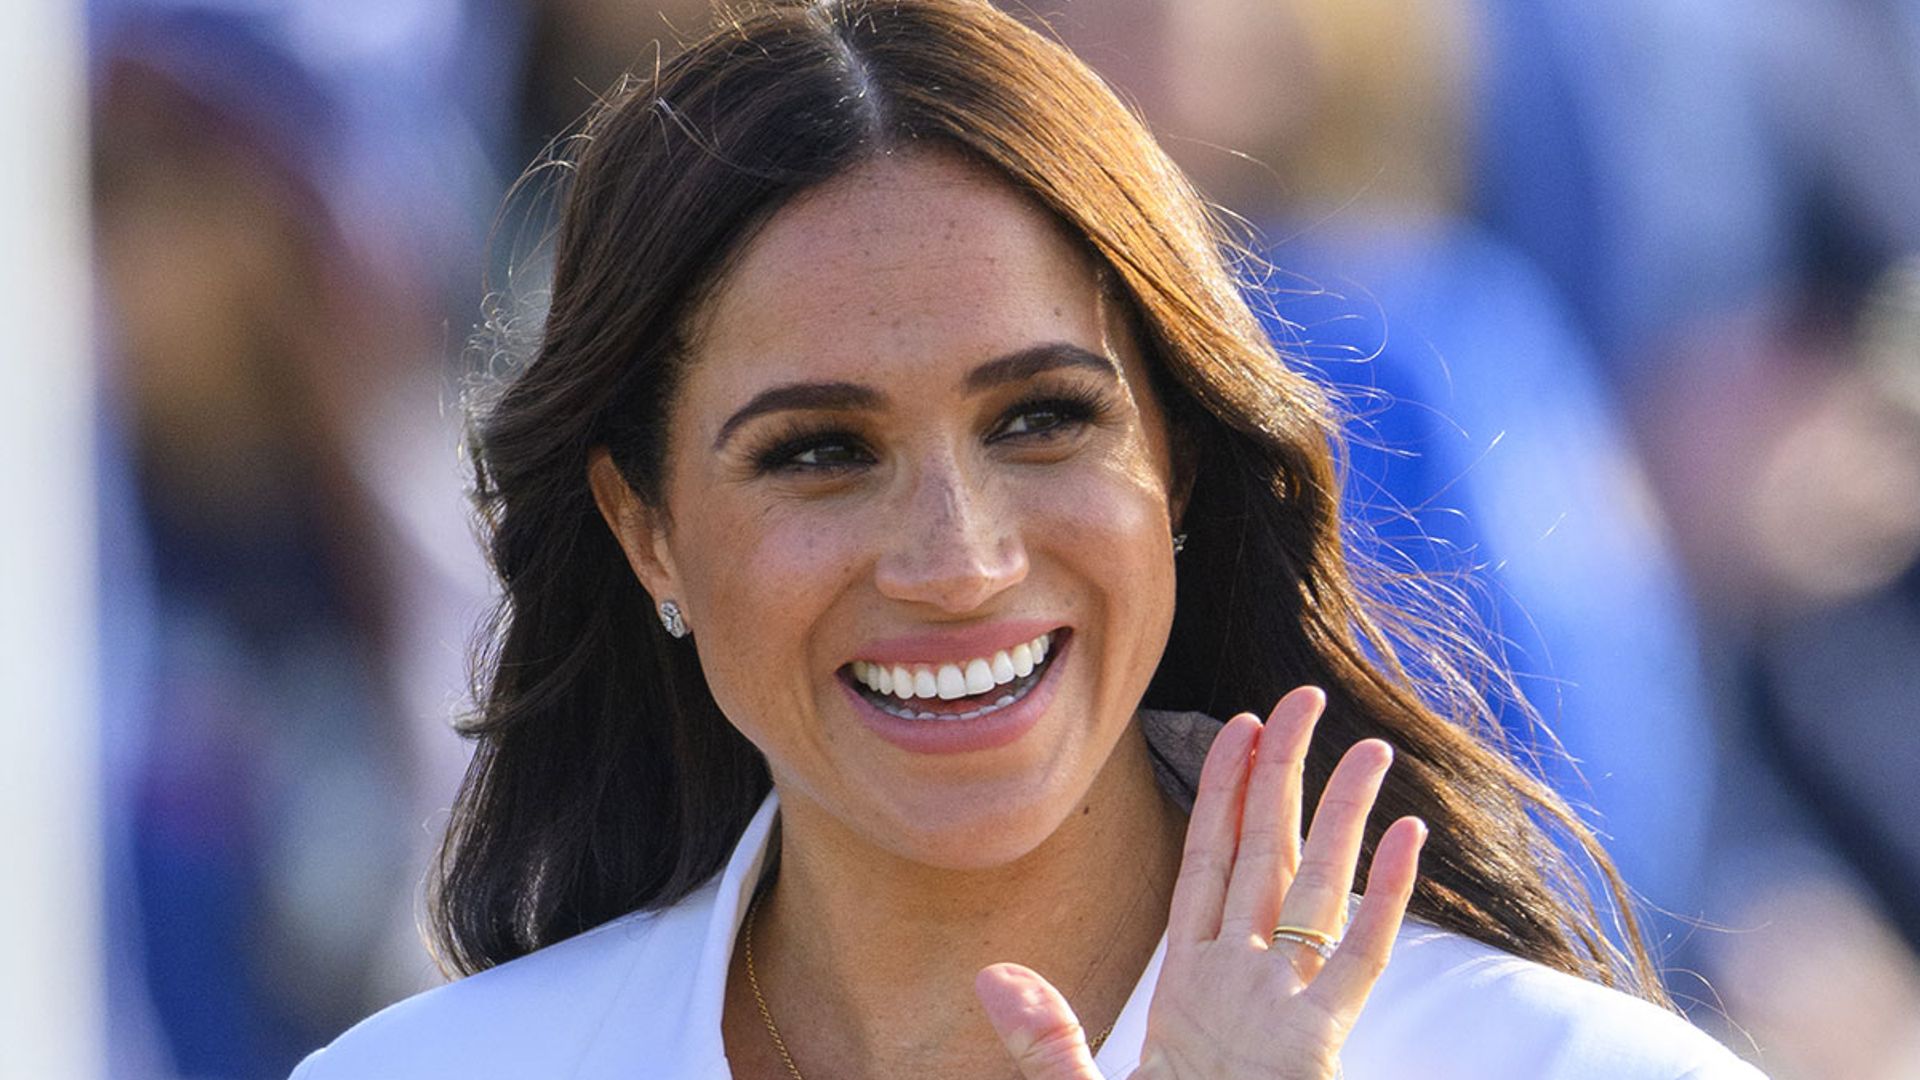 The real reason Meghan Markle wore white to Invictus Games revealed ...